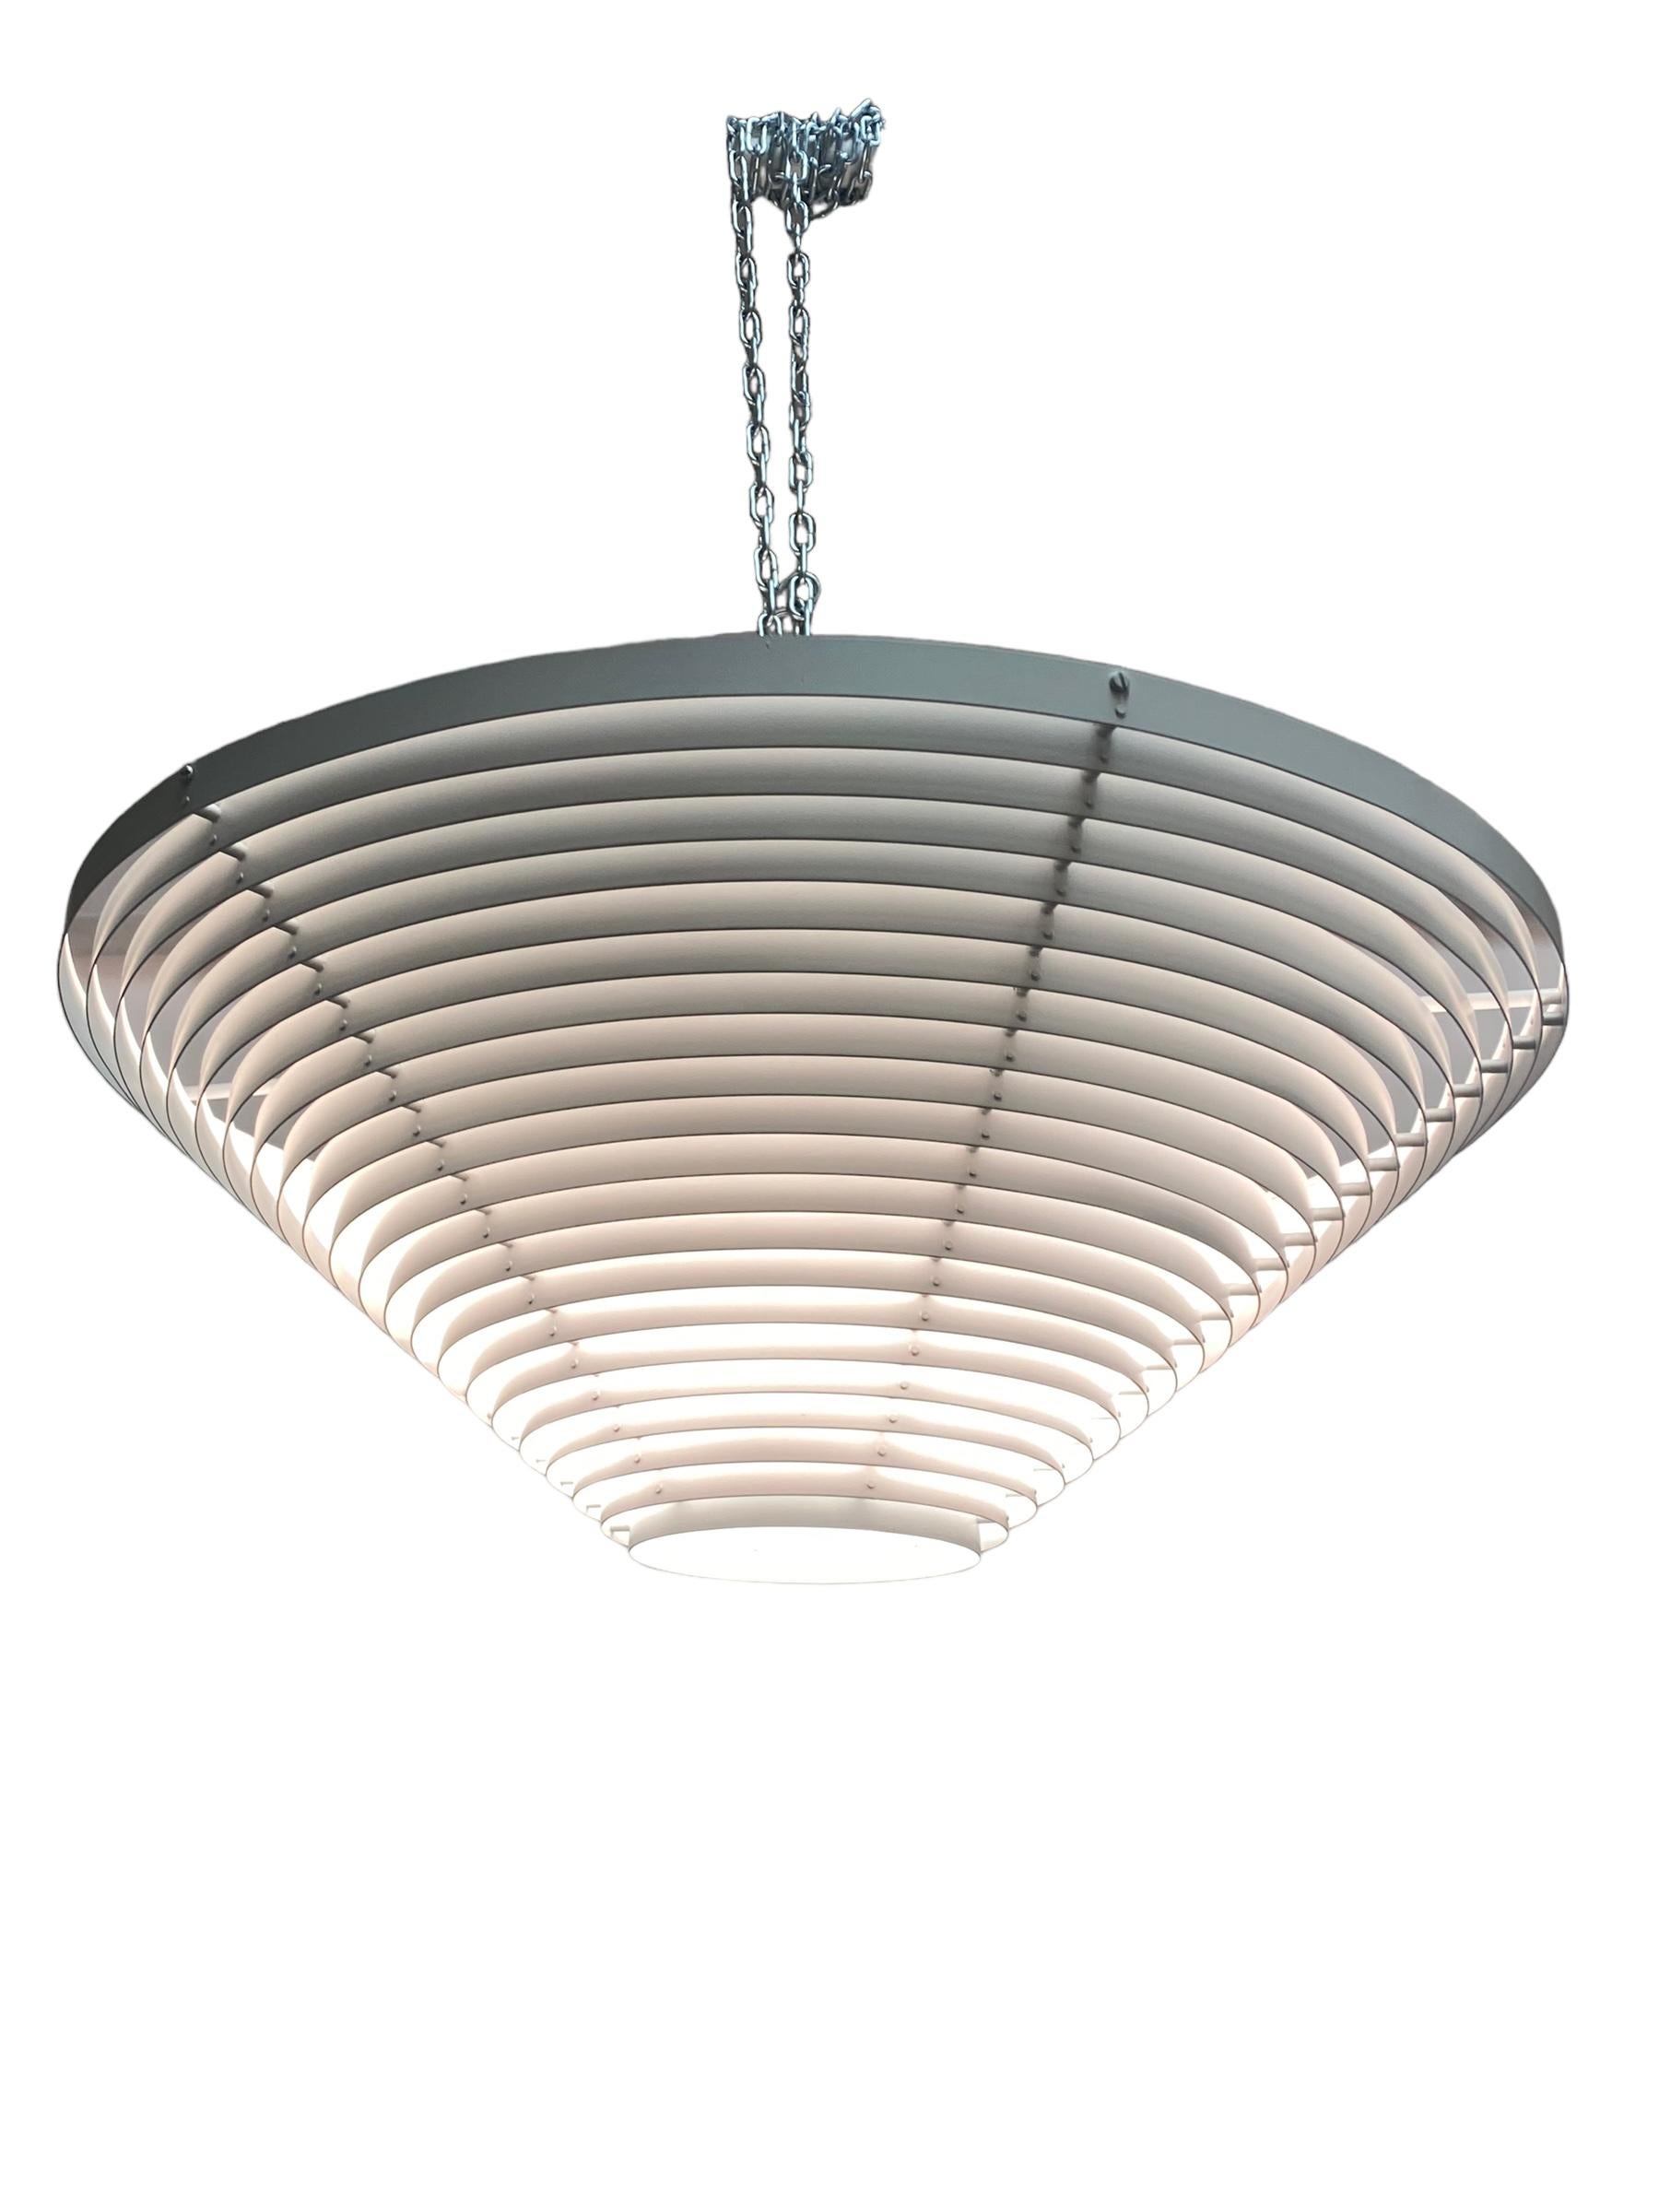 An iconic ceiling pendant model A622, designed by Alvar Aalto in the 1950s, and manufactured by Valaisinpaja Oy in Finland in the 1970s. In line with all Aalto furniture and lighting designs, this piece is very minimalistic and functional. The